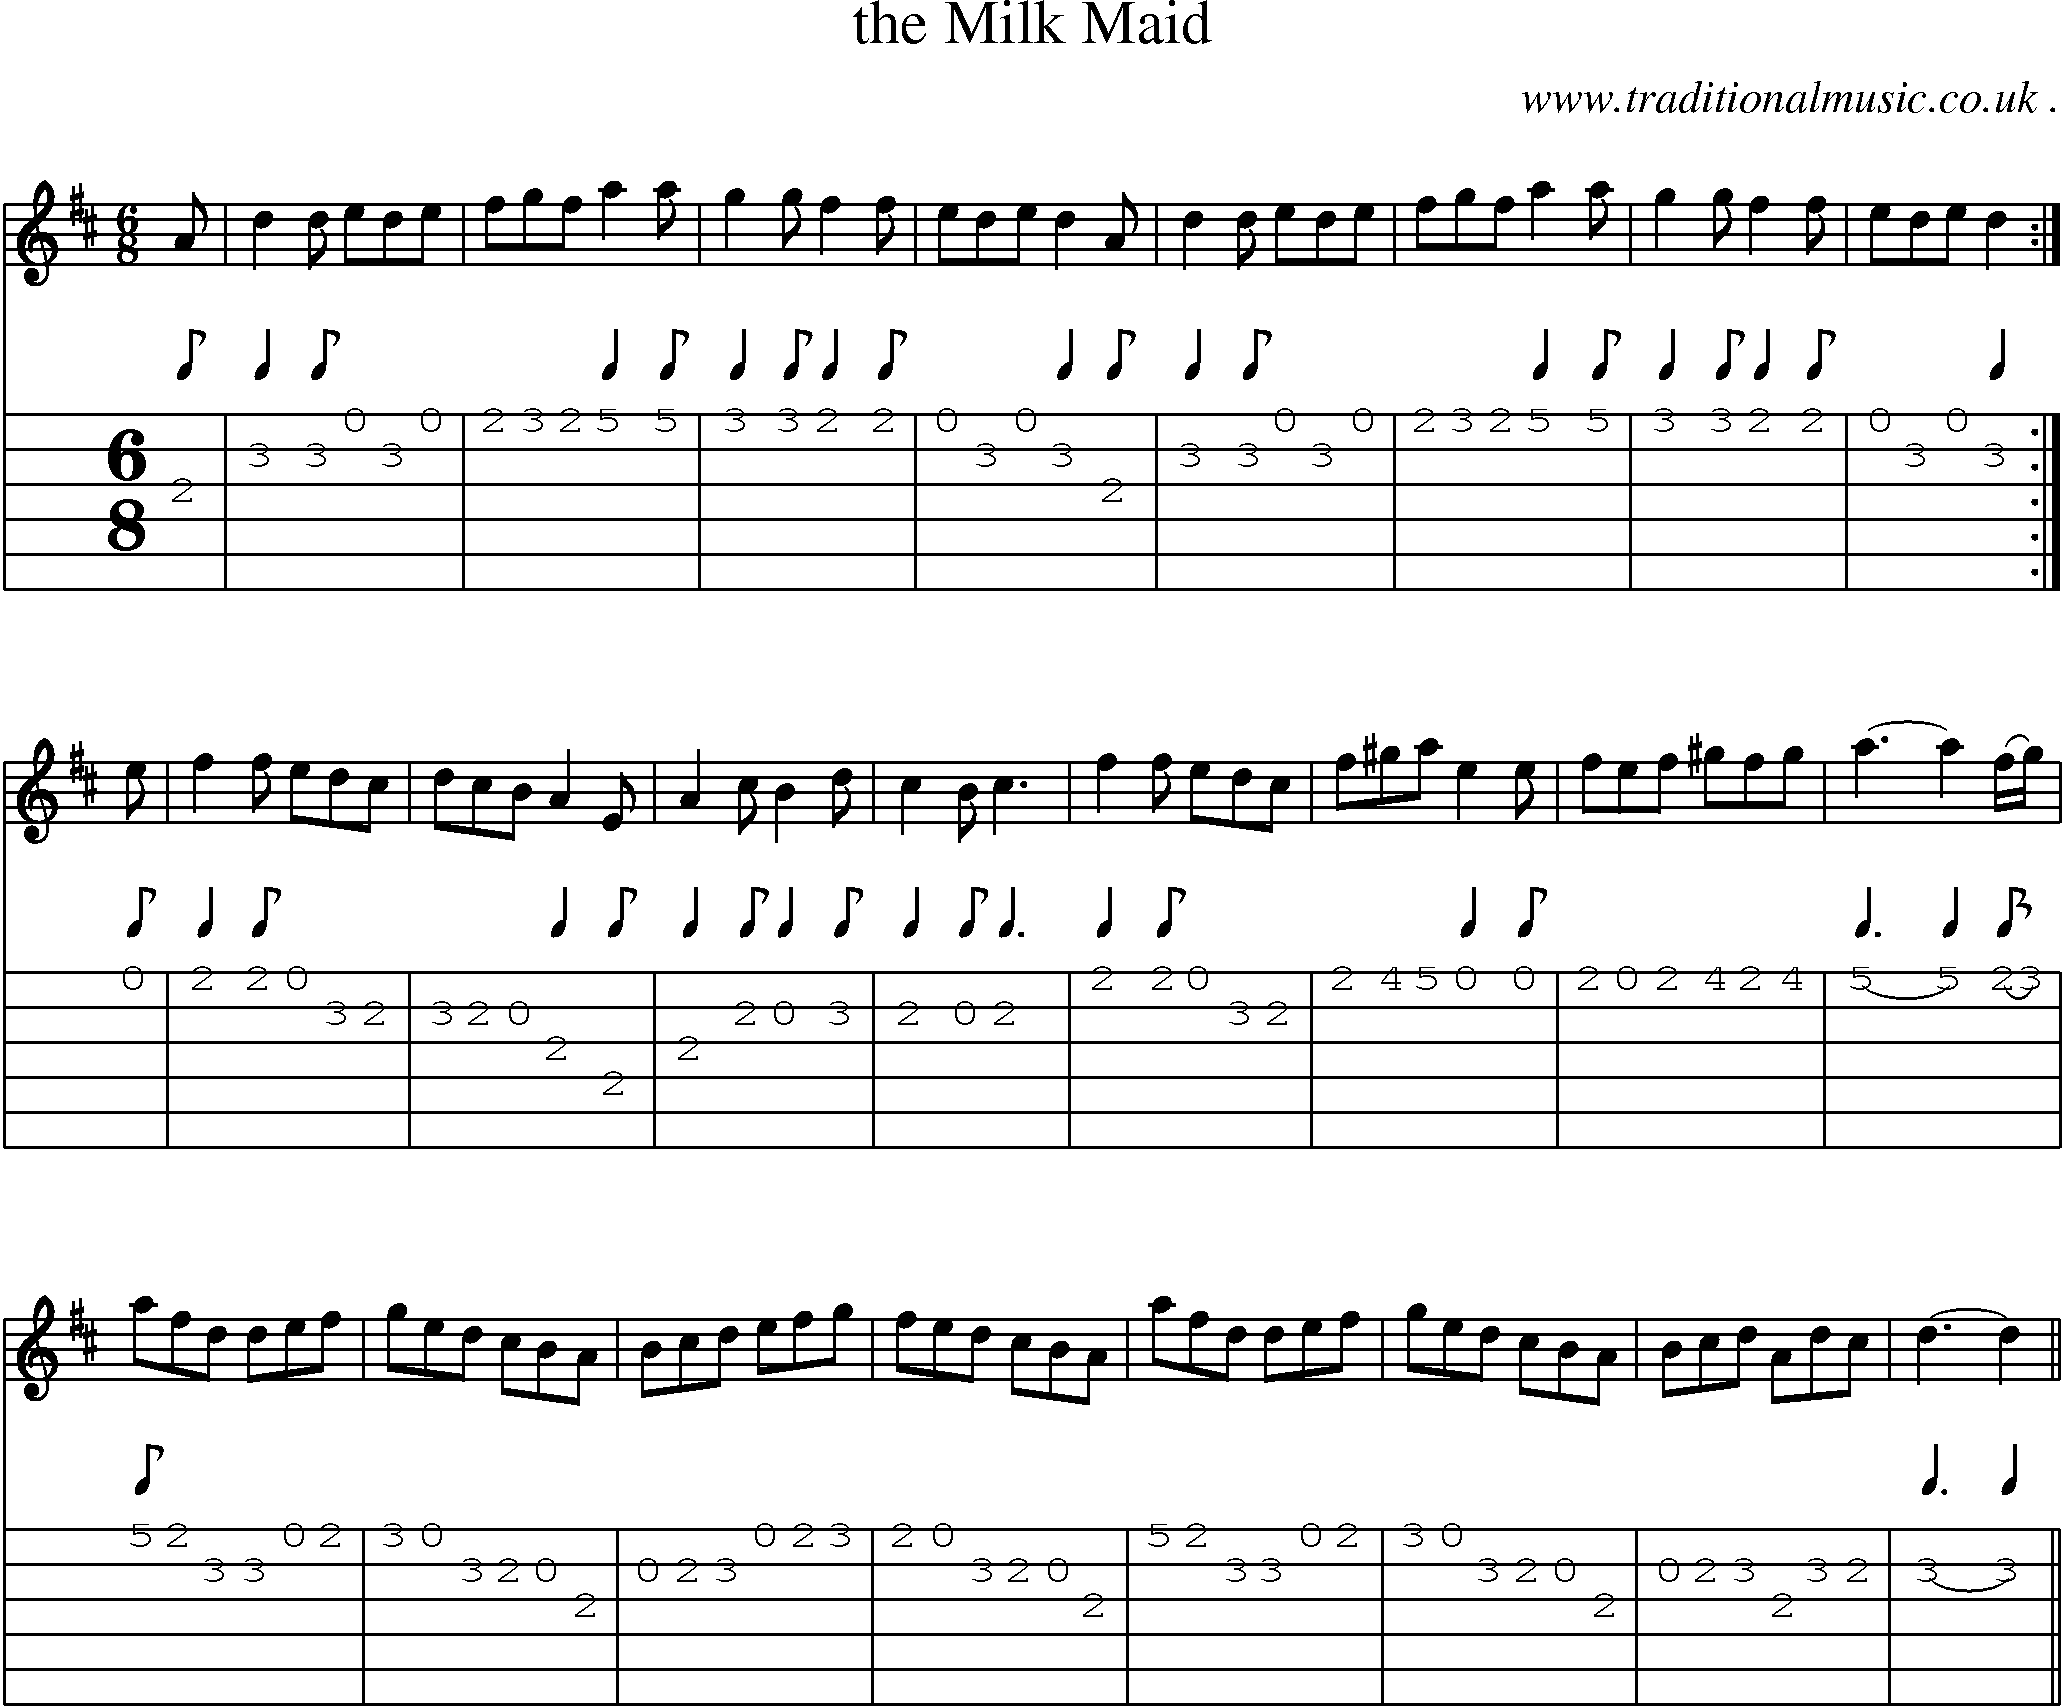 Sheet-Music and Guitar Tabs for The Milk Maid